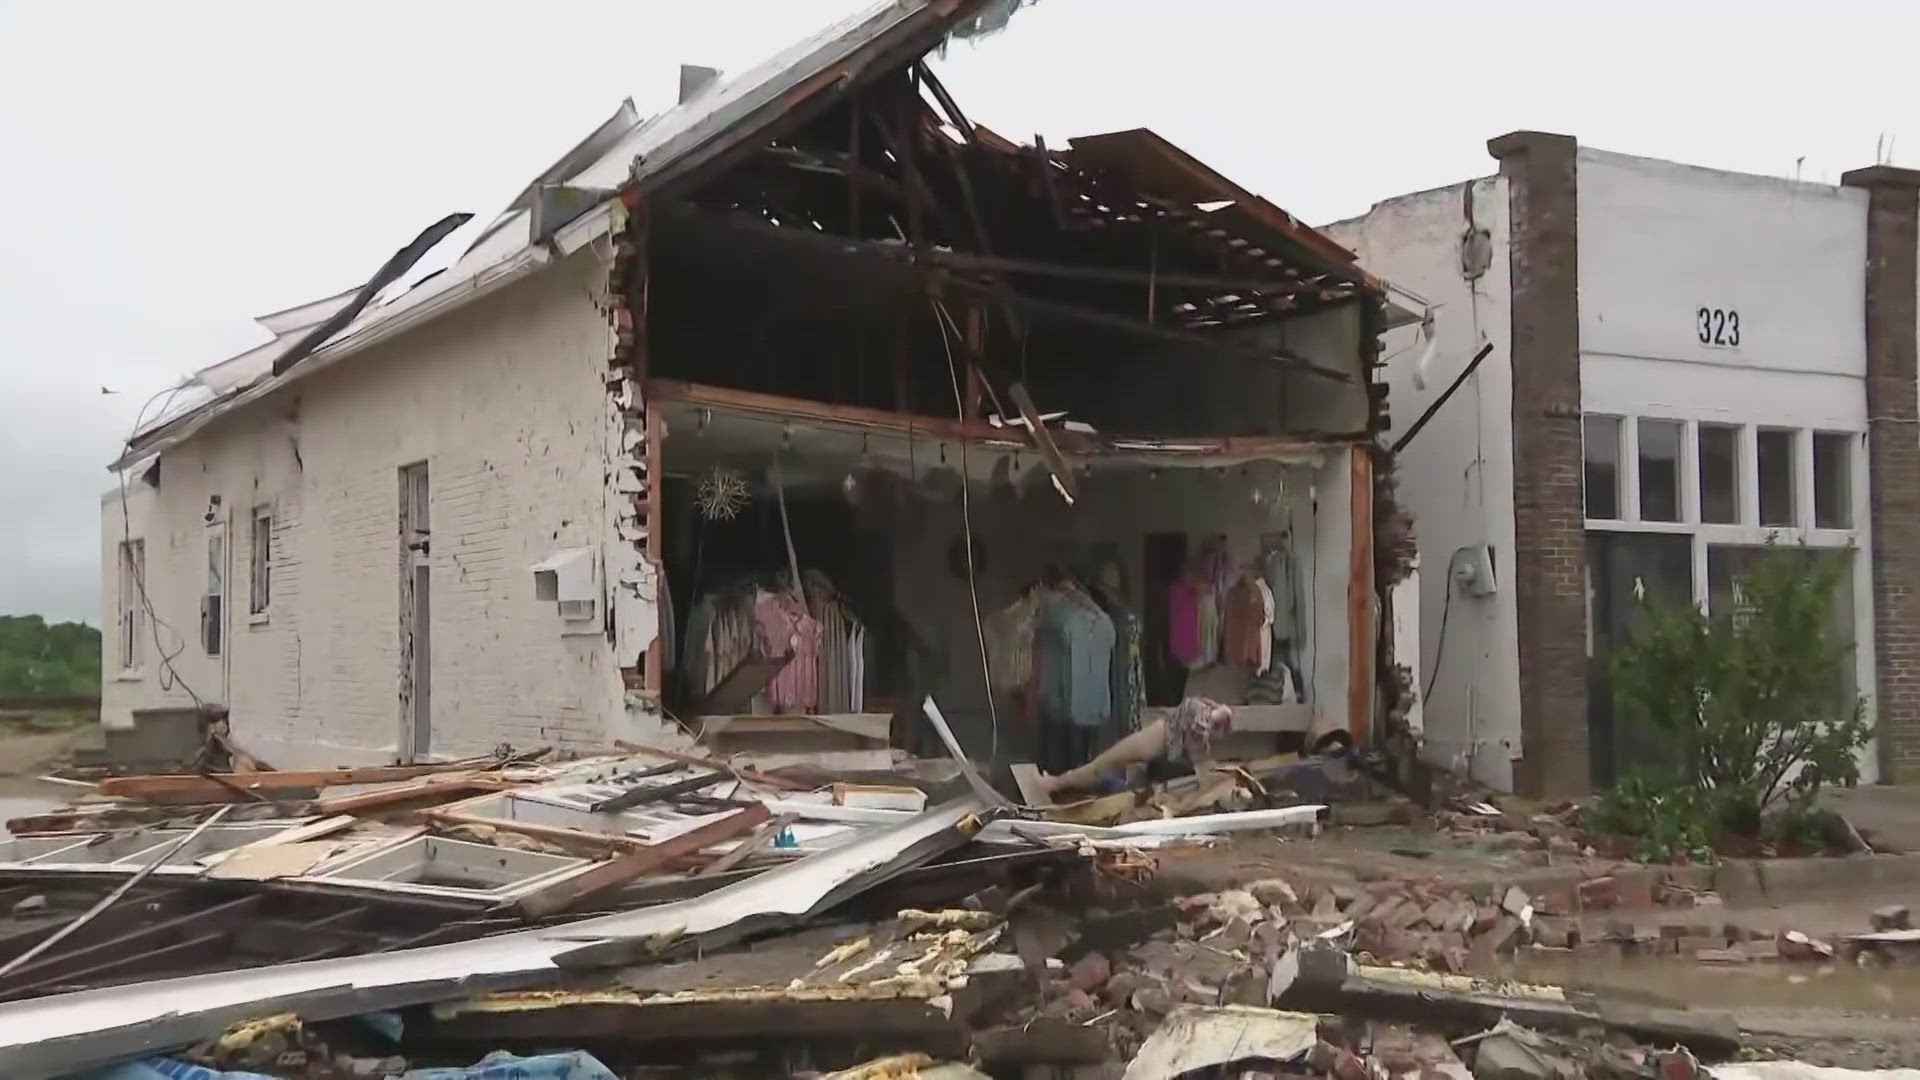 From Nebraska to Texas more than 130 tornadoes touched down throughout the Midwest. The Iowa governor has issued a disaster proclamation for Pottawattamie County.